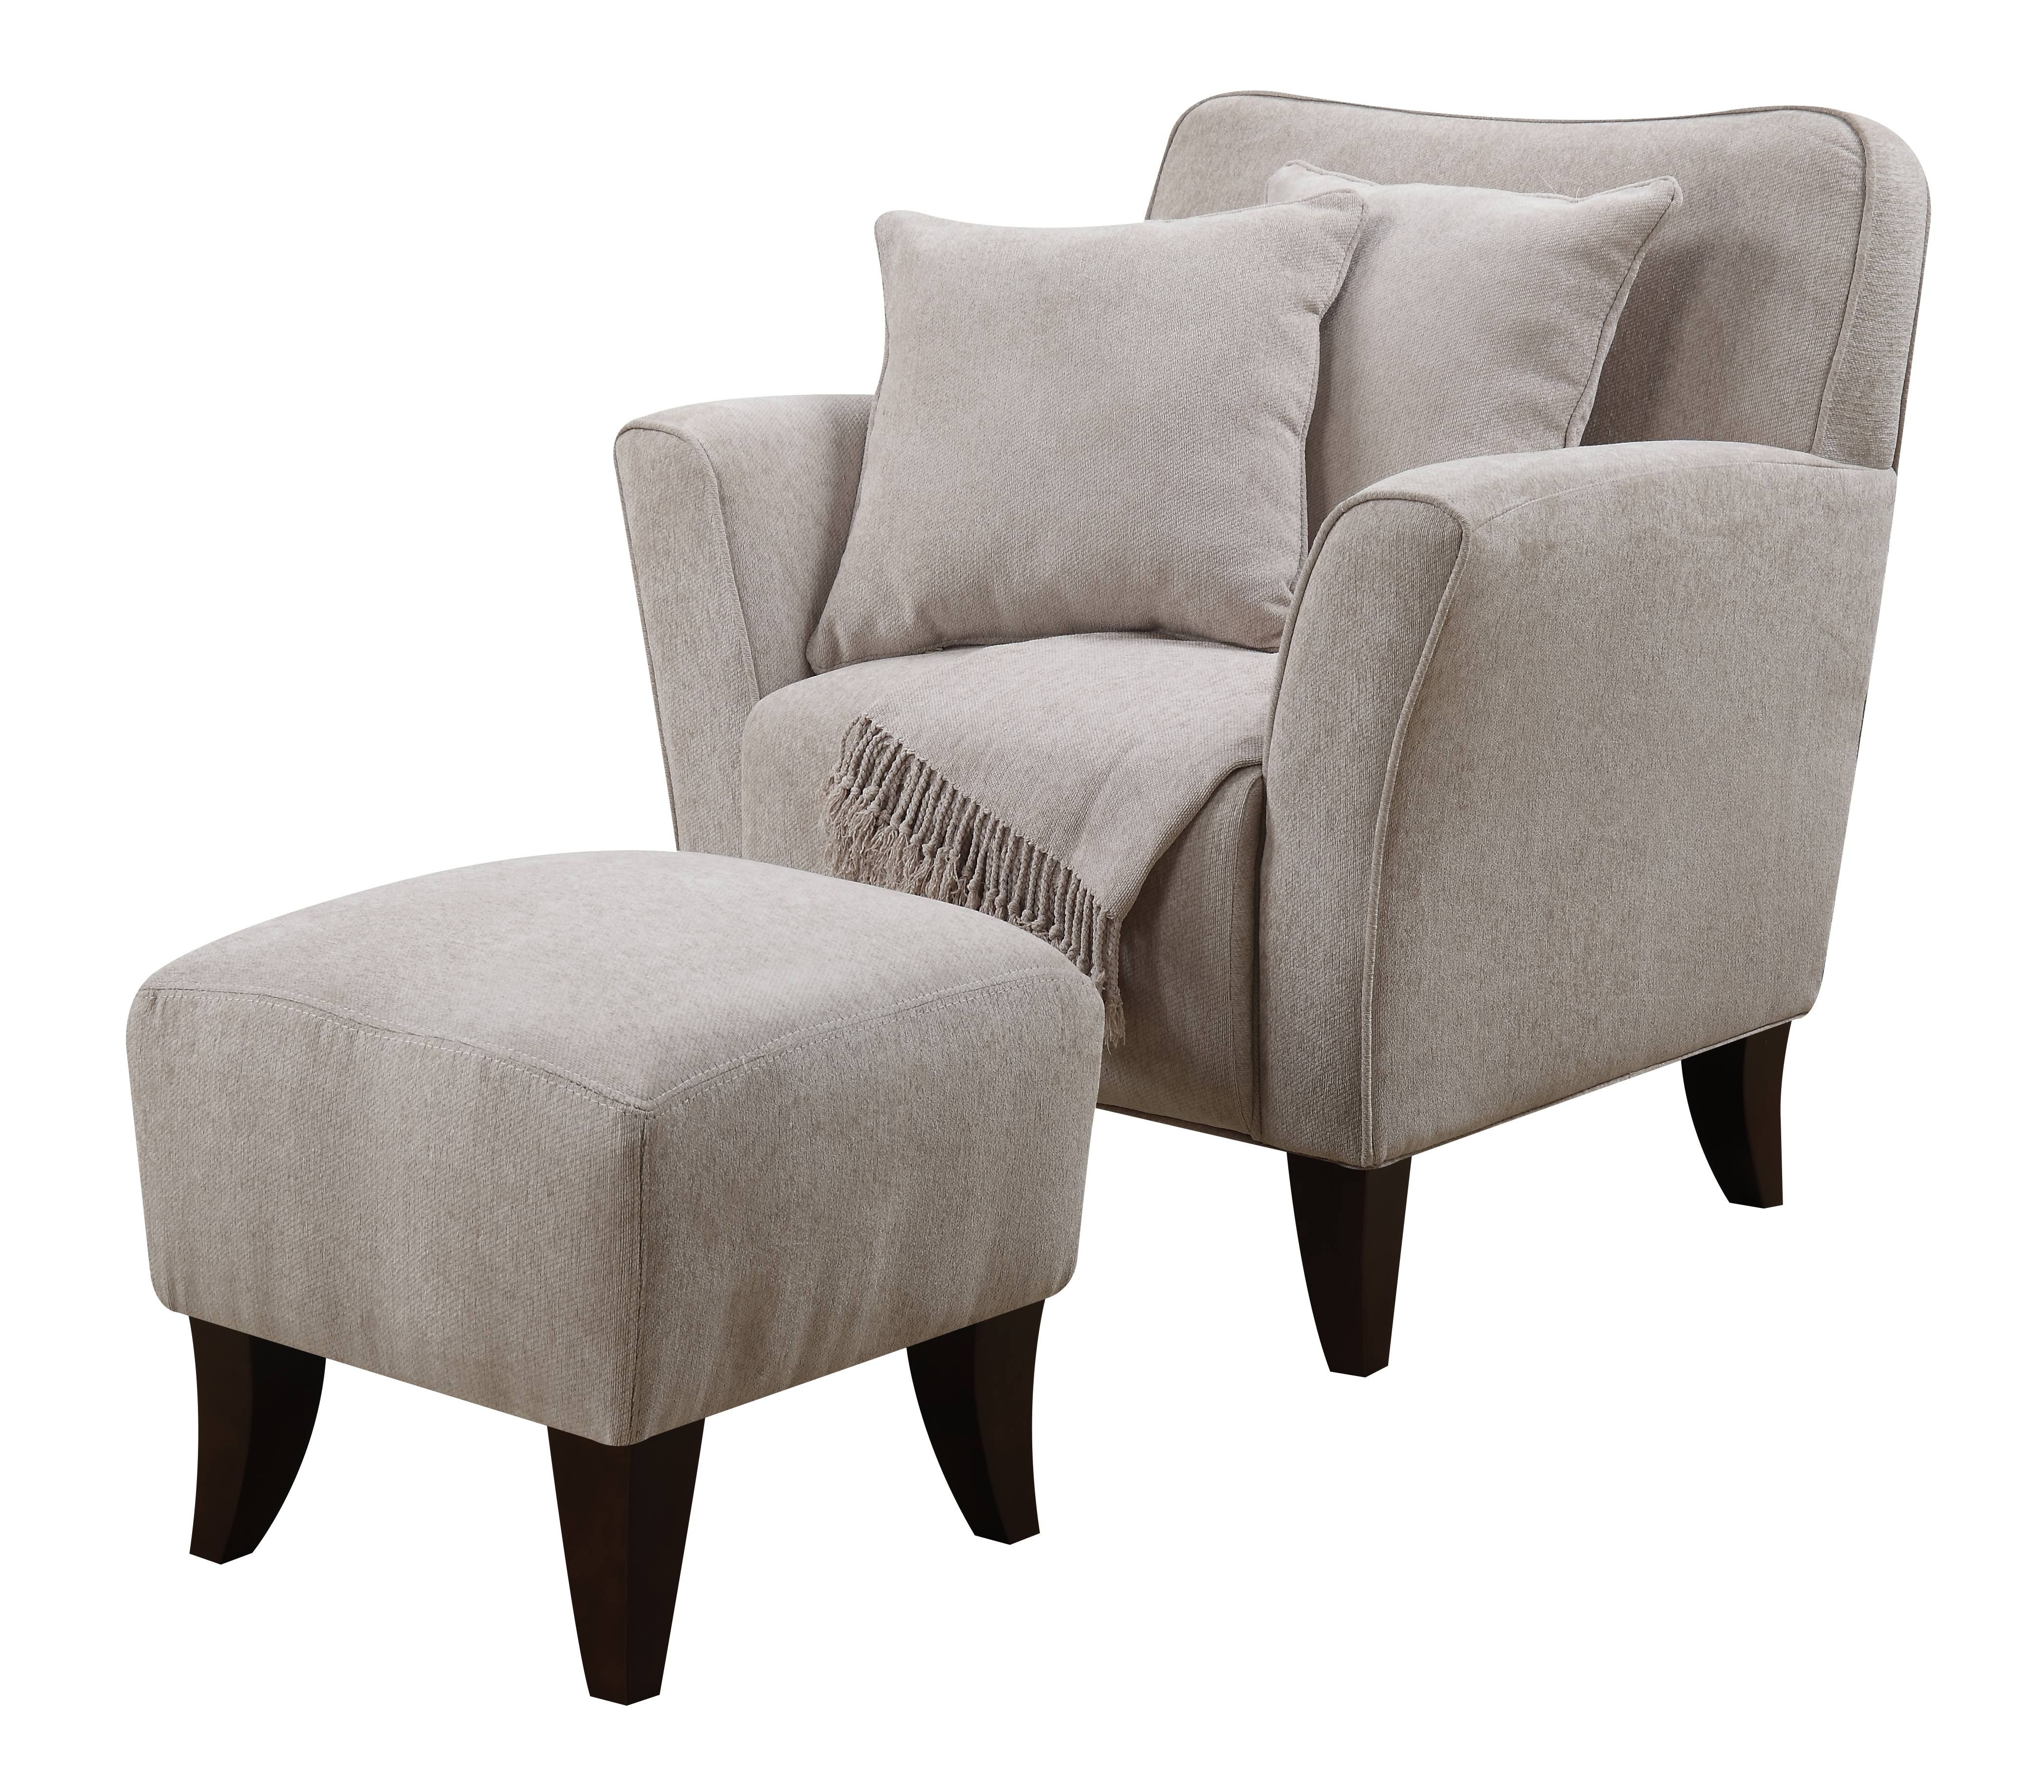 Well Known Cozy Accent Chair With Ottoman, Pillows And Throw (View 15 of 20)